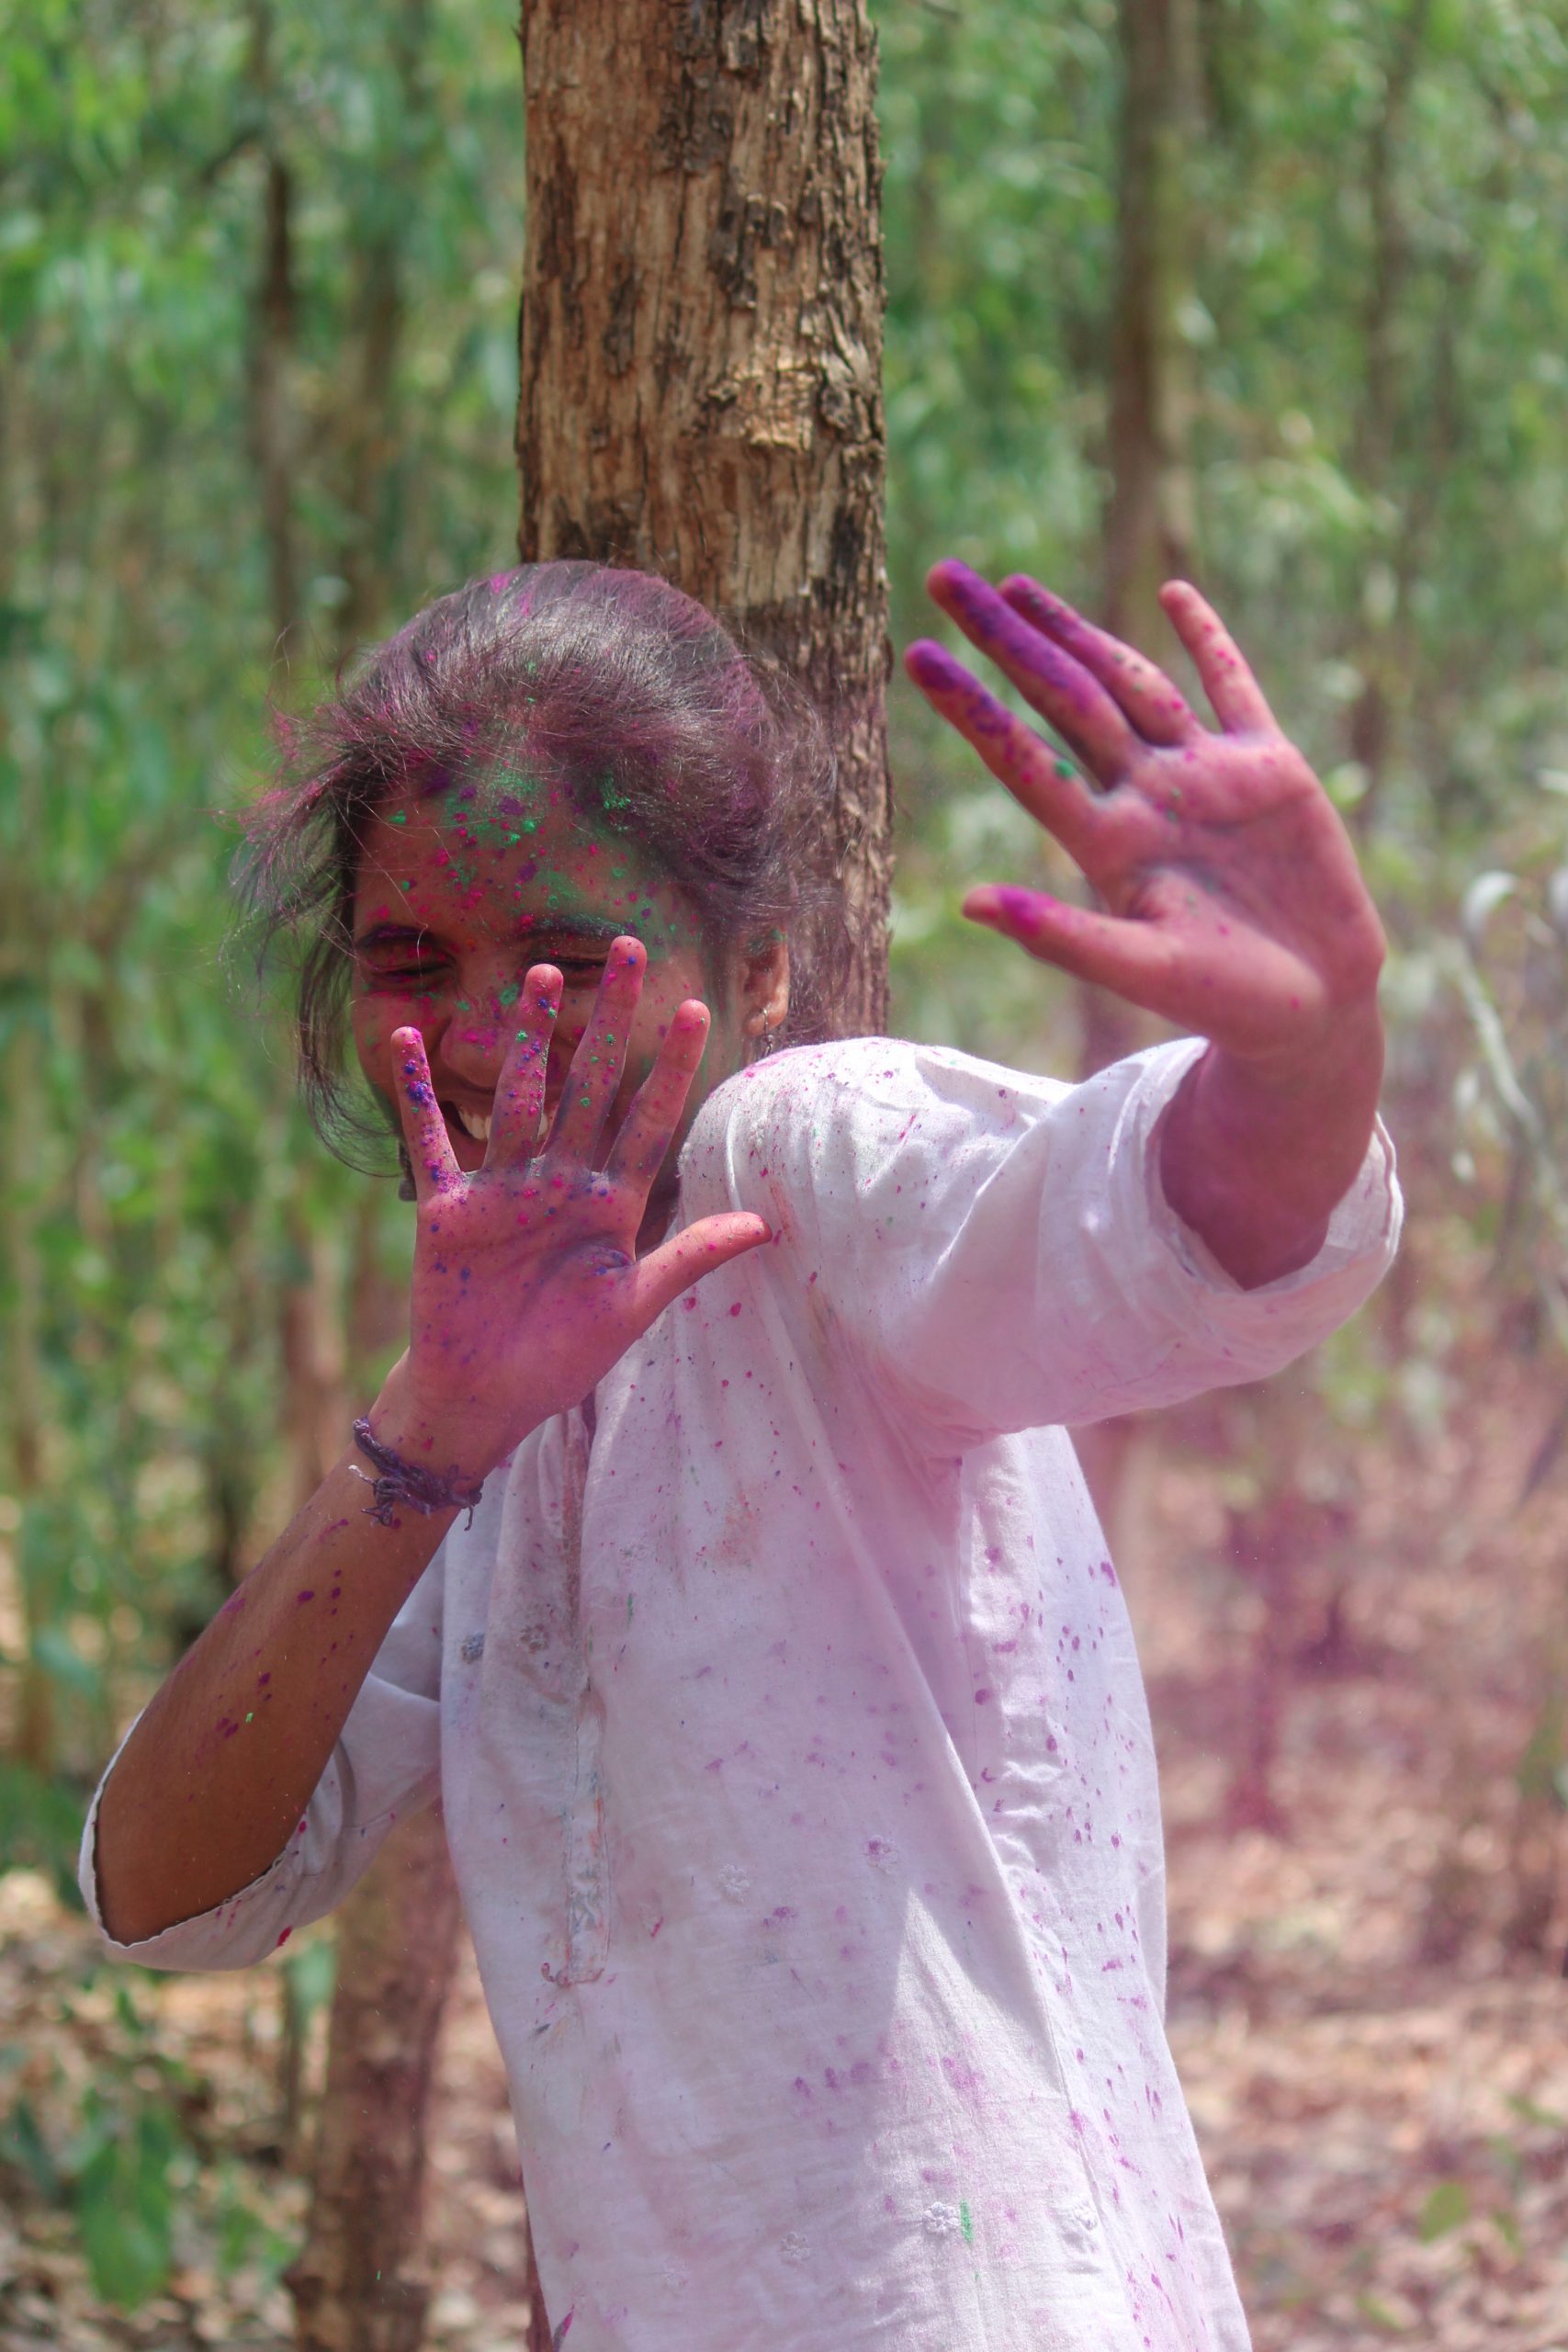 A girl playing with Holi colors